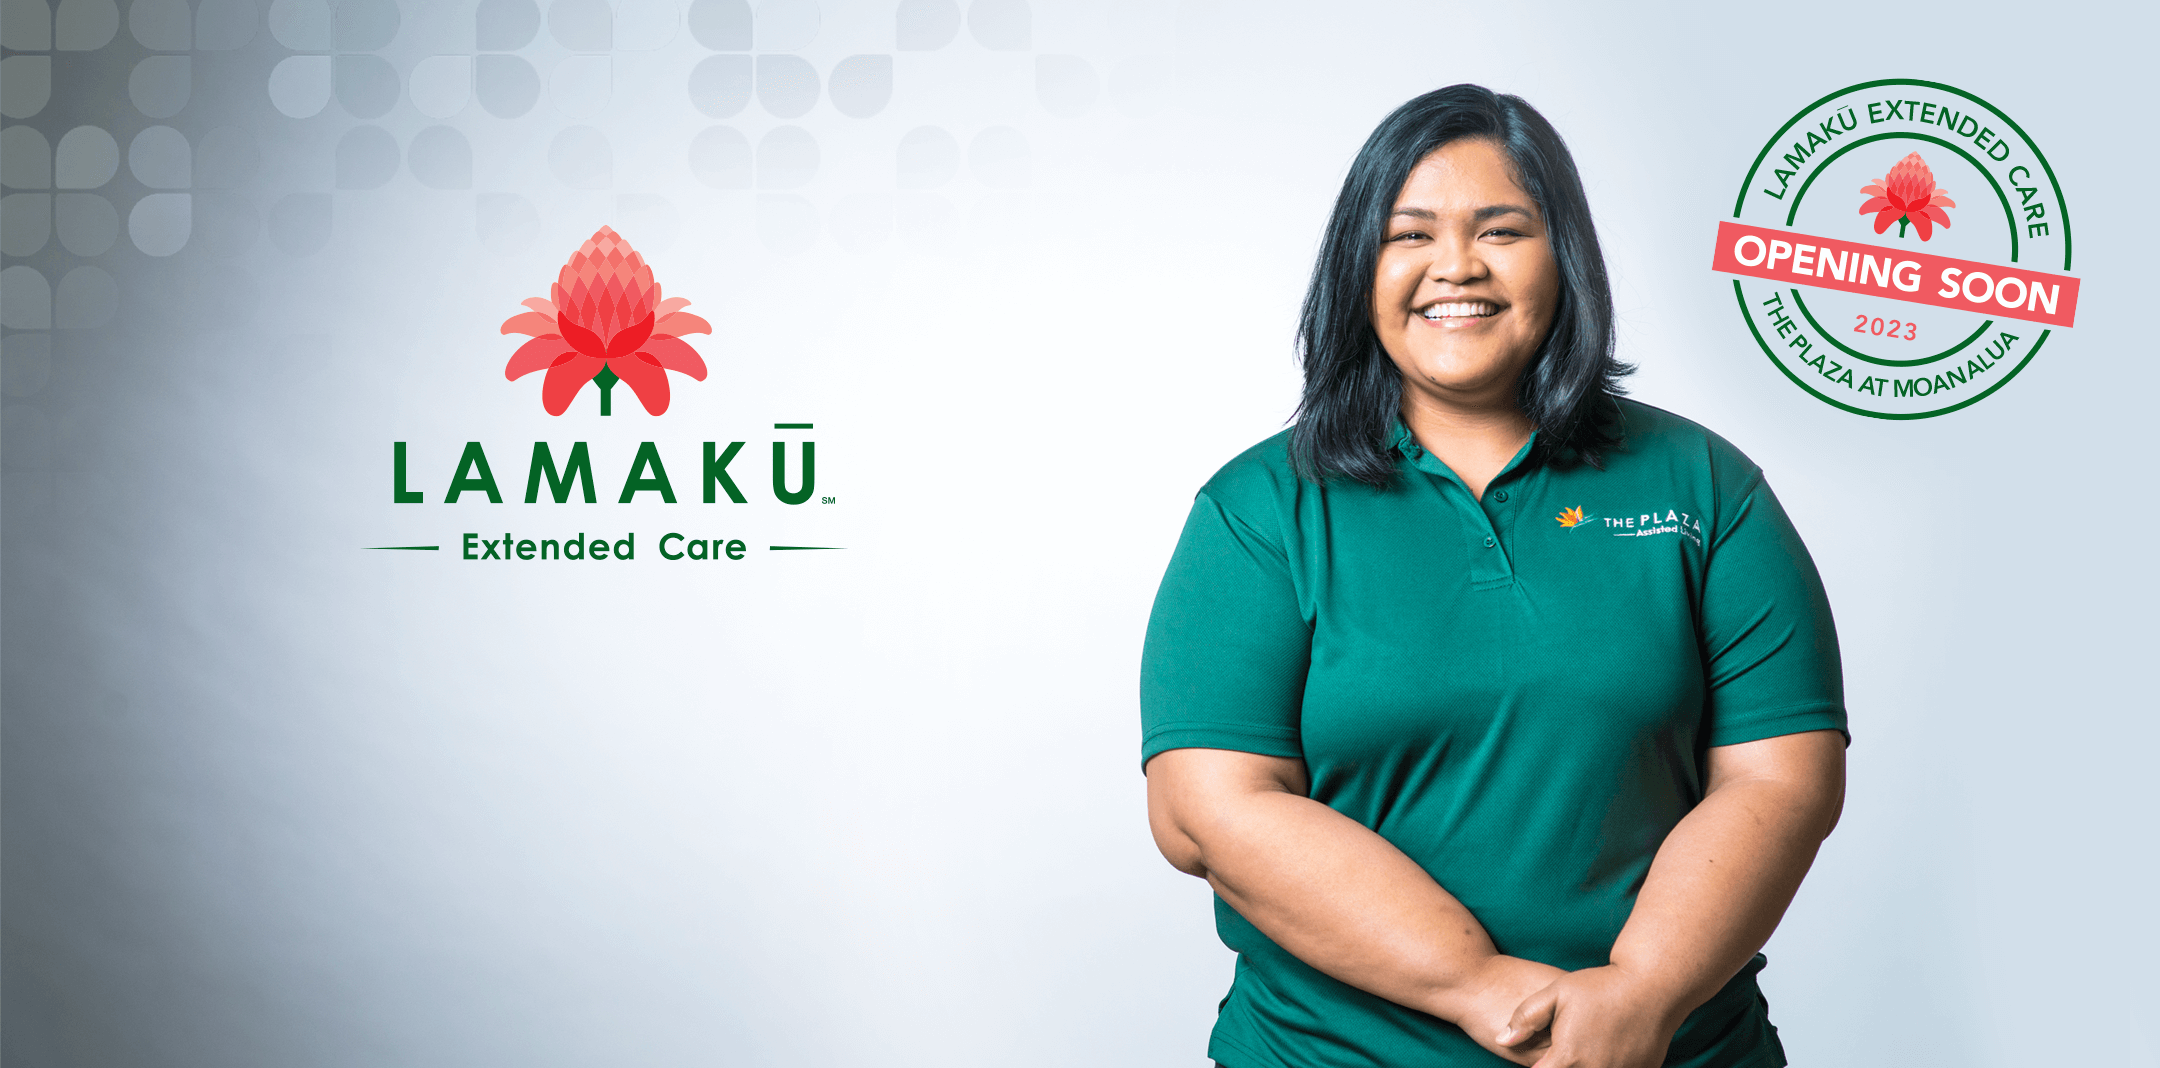 Lamaku Extended Care coming soon to Moanalua